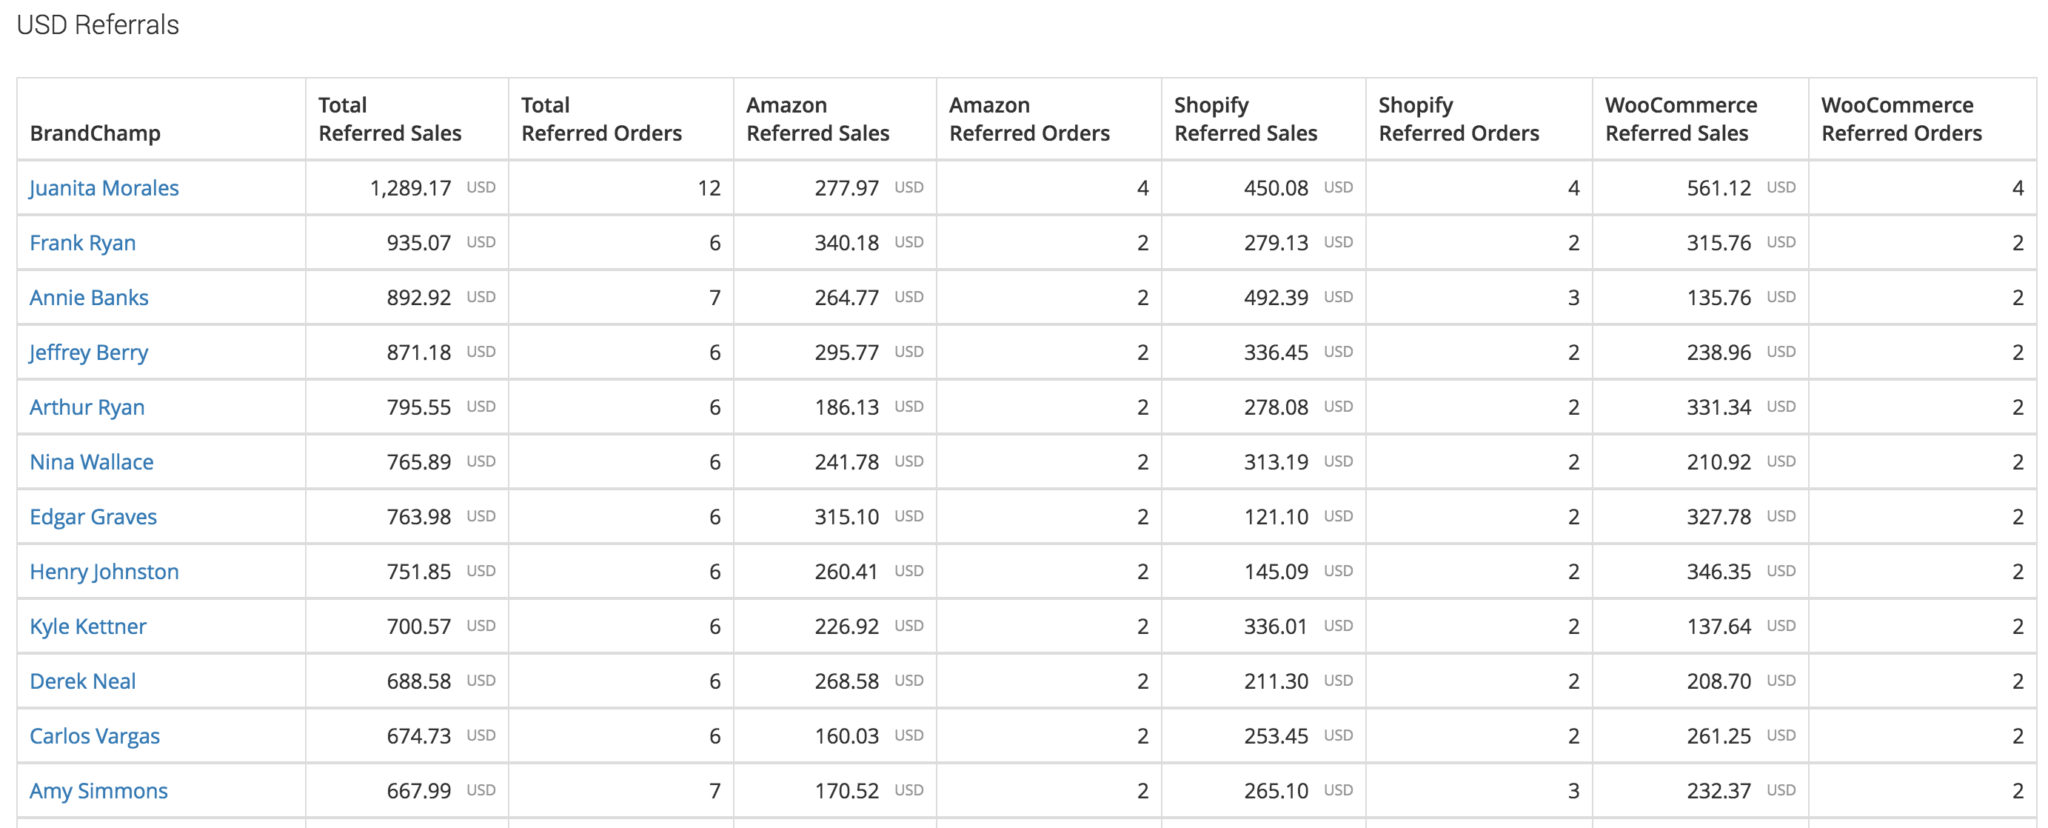 Ranking of ambassadors by referral sales Amazon Shopify WooCommerce